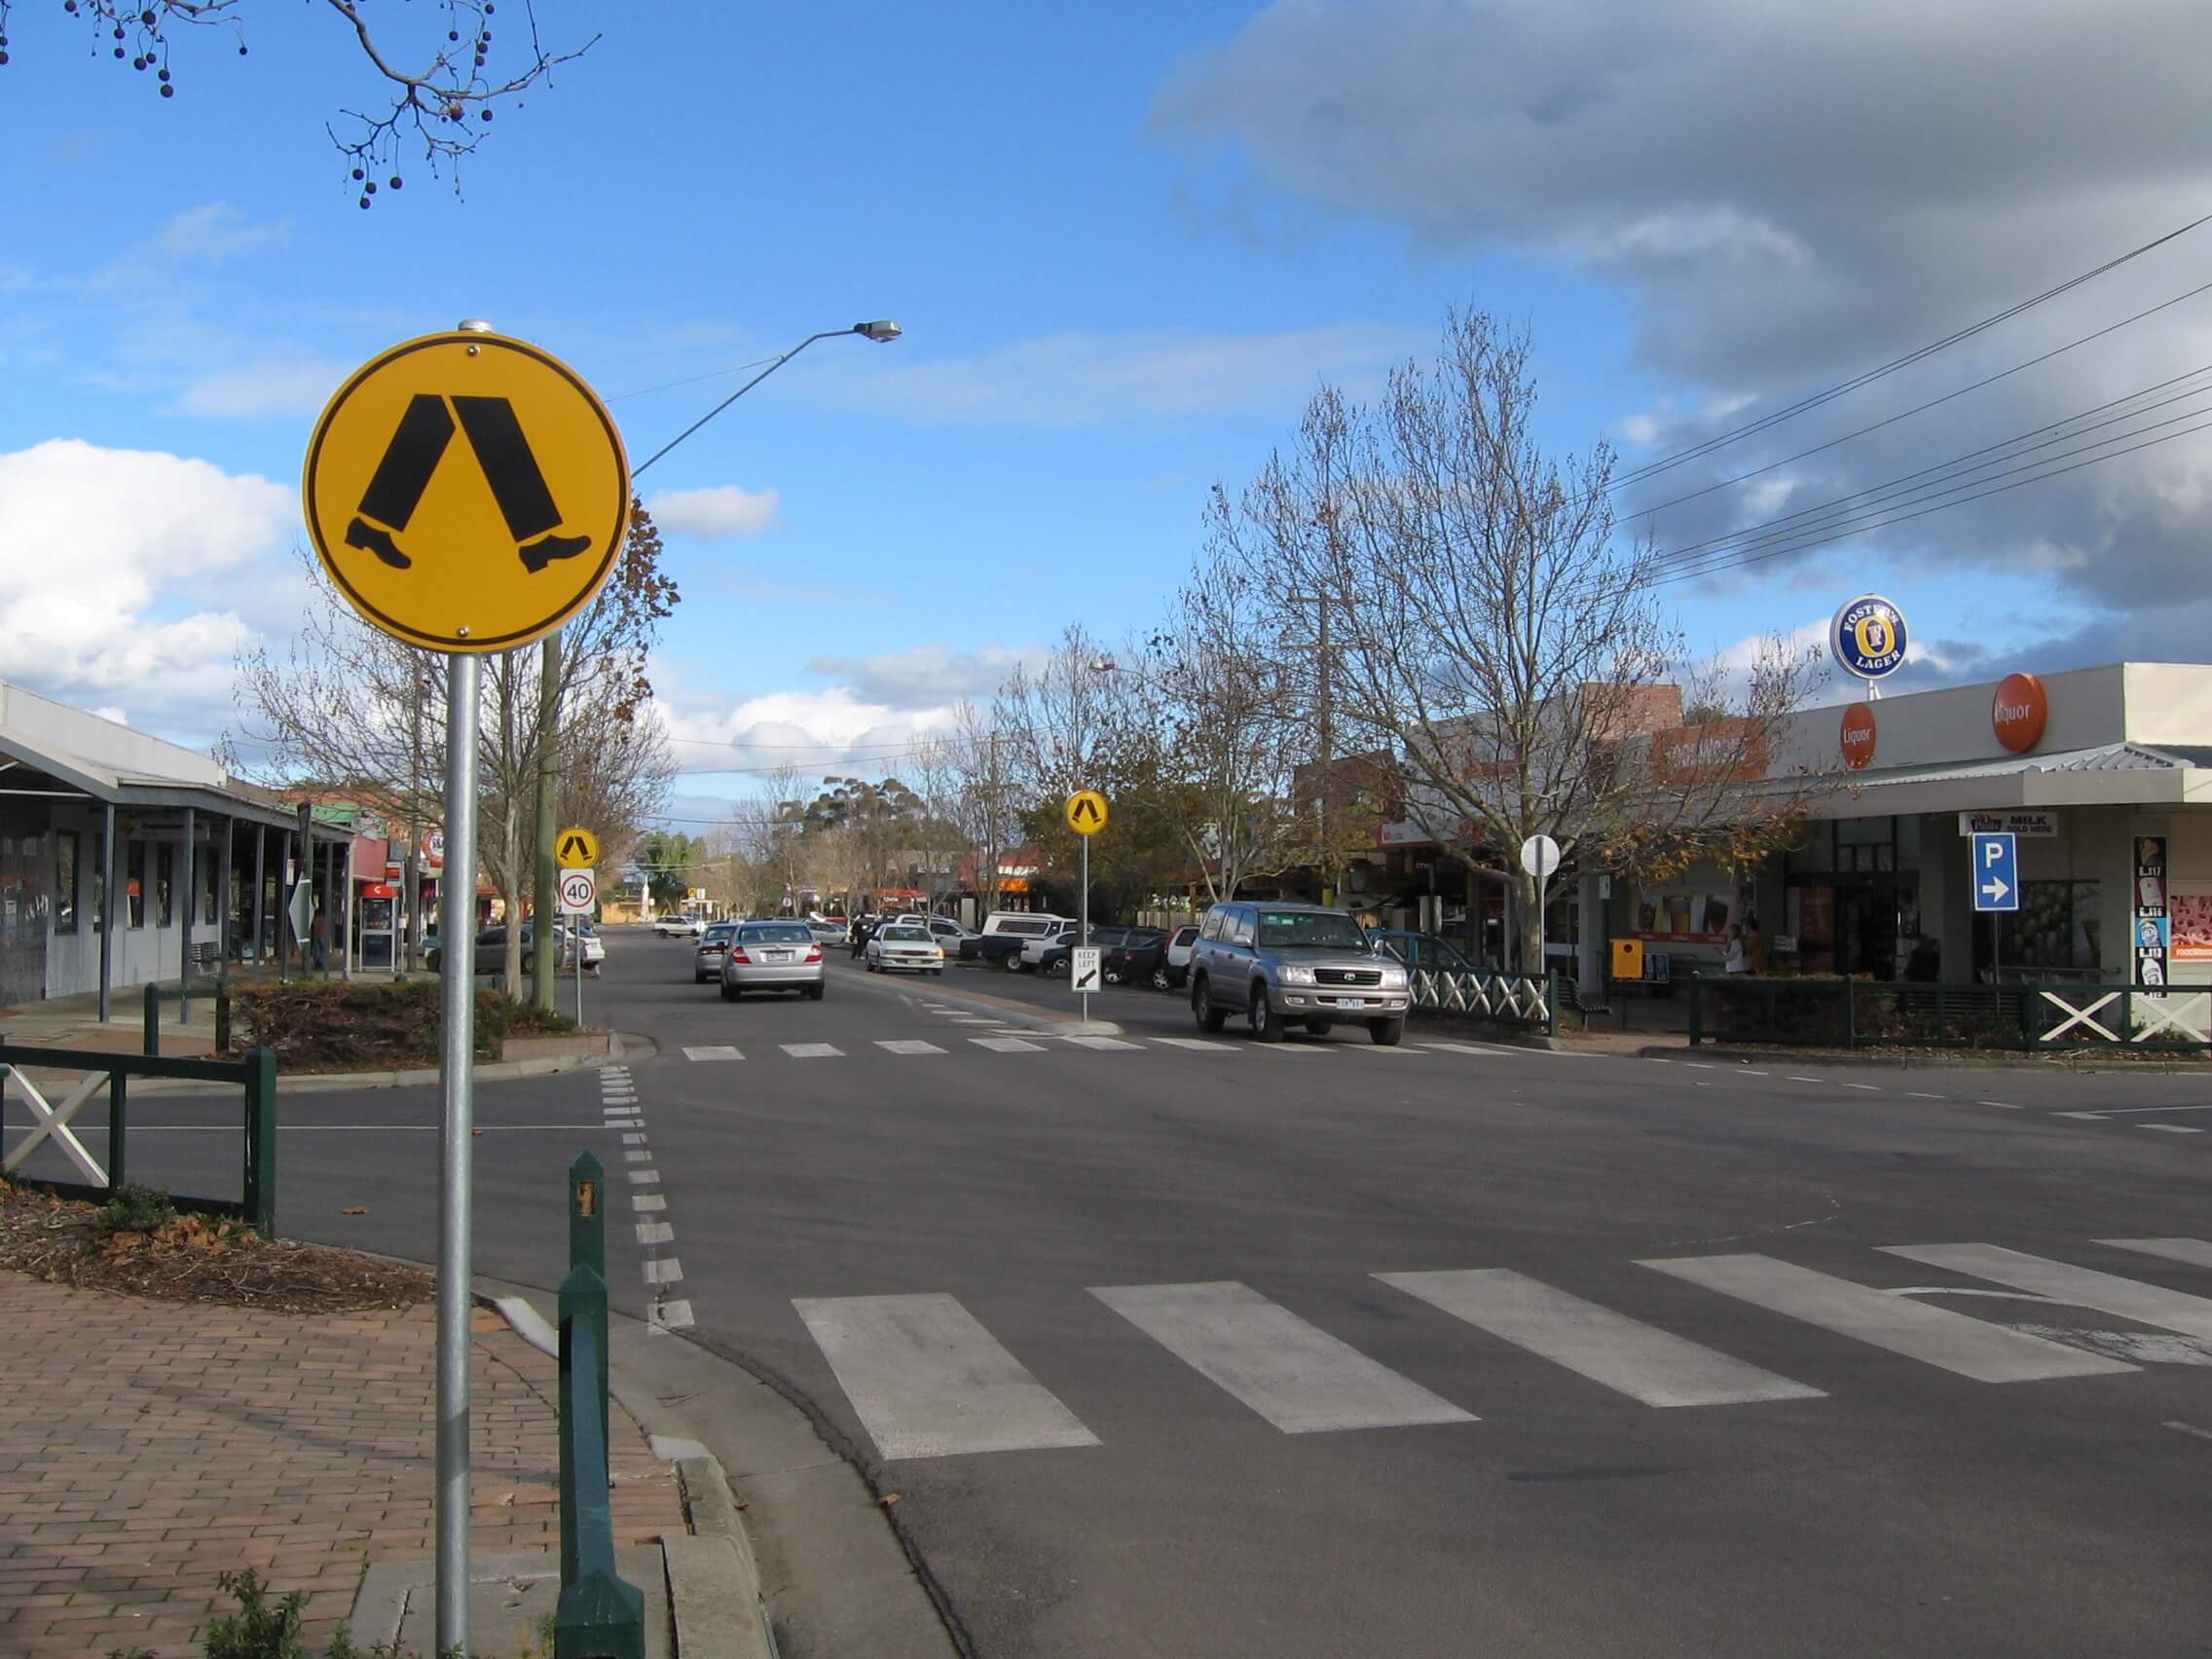 About Whittlesea